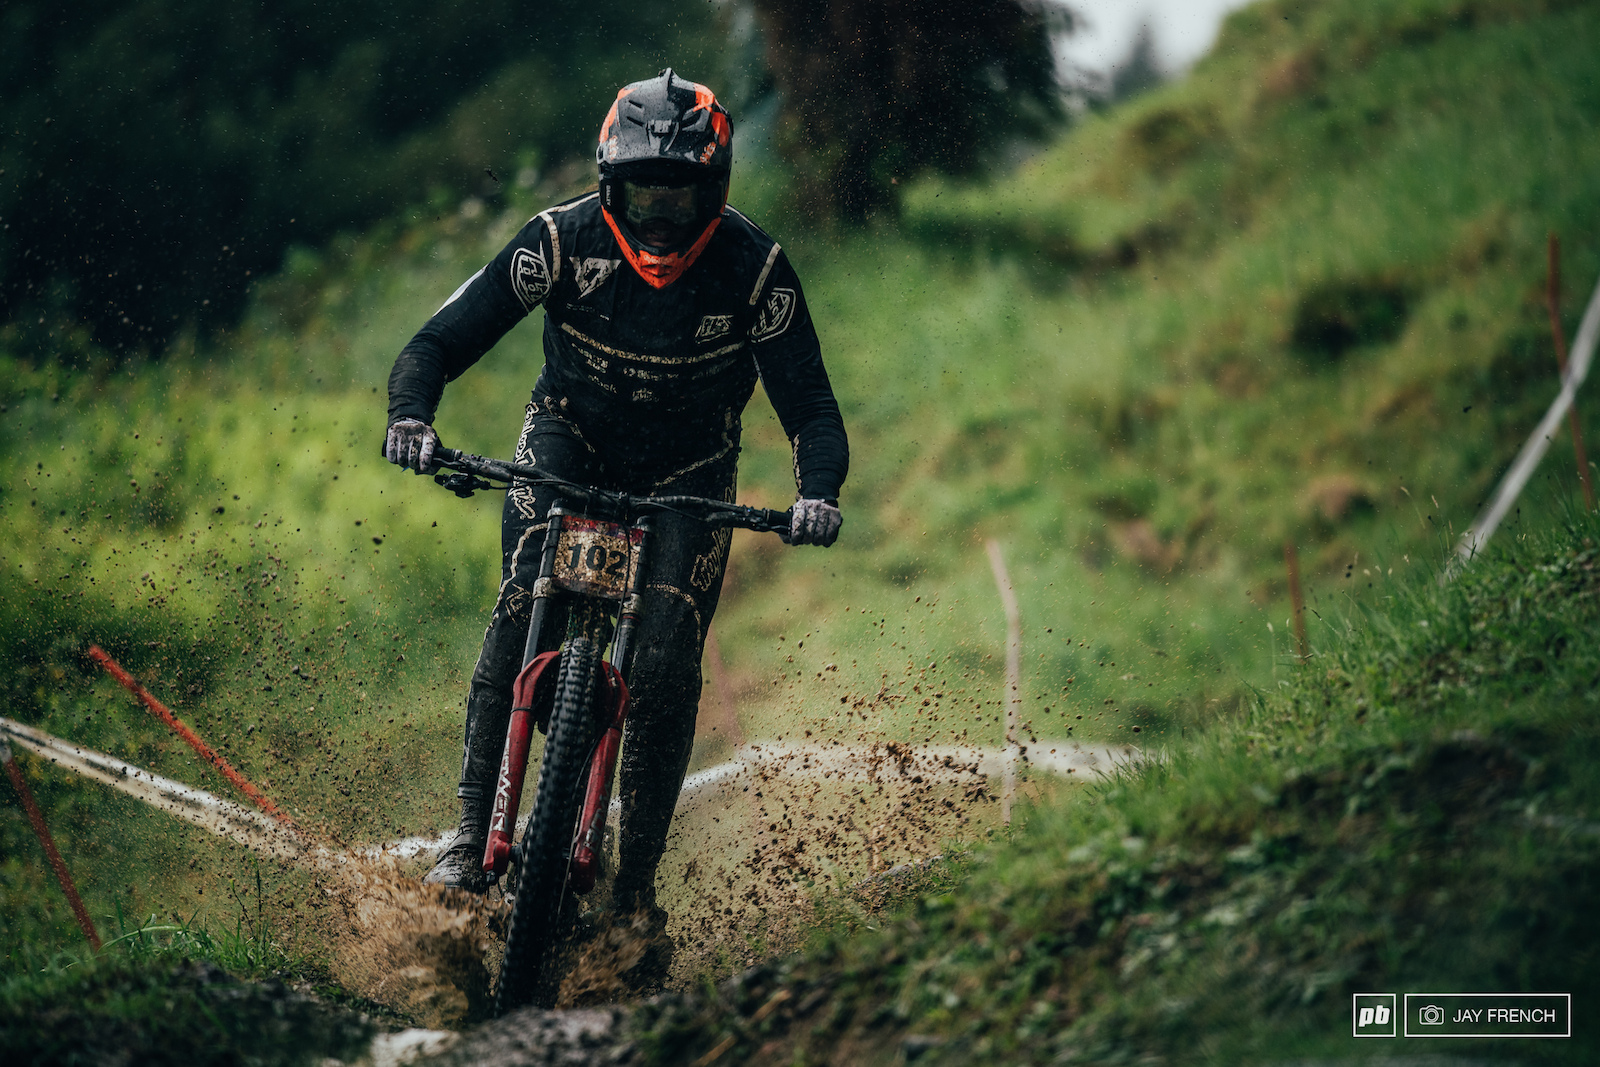 Kalani rips through "hecklers puddle" putting in a great race for fourth, backing up a strong performance last week at the Taniwha DH in the Redwoods.